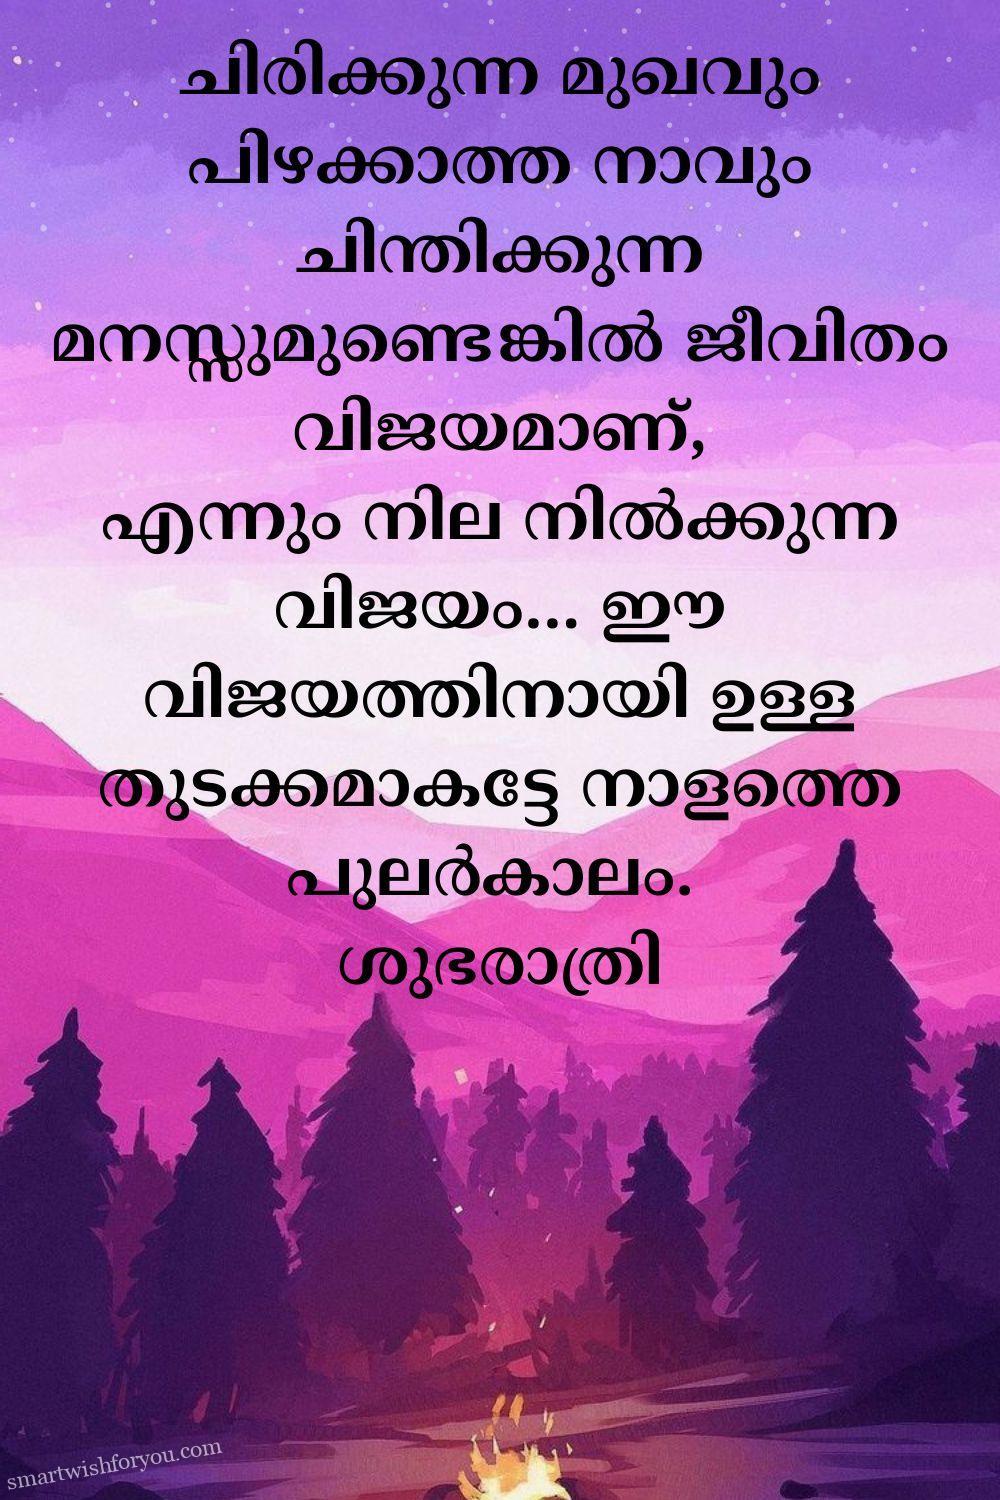 Latest Malayalam Good Night Messages And Images